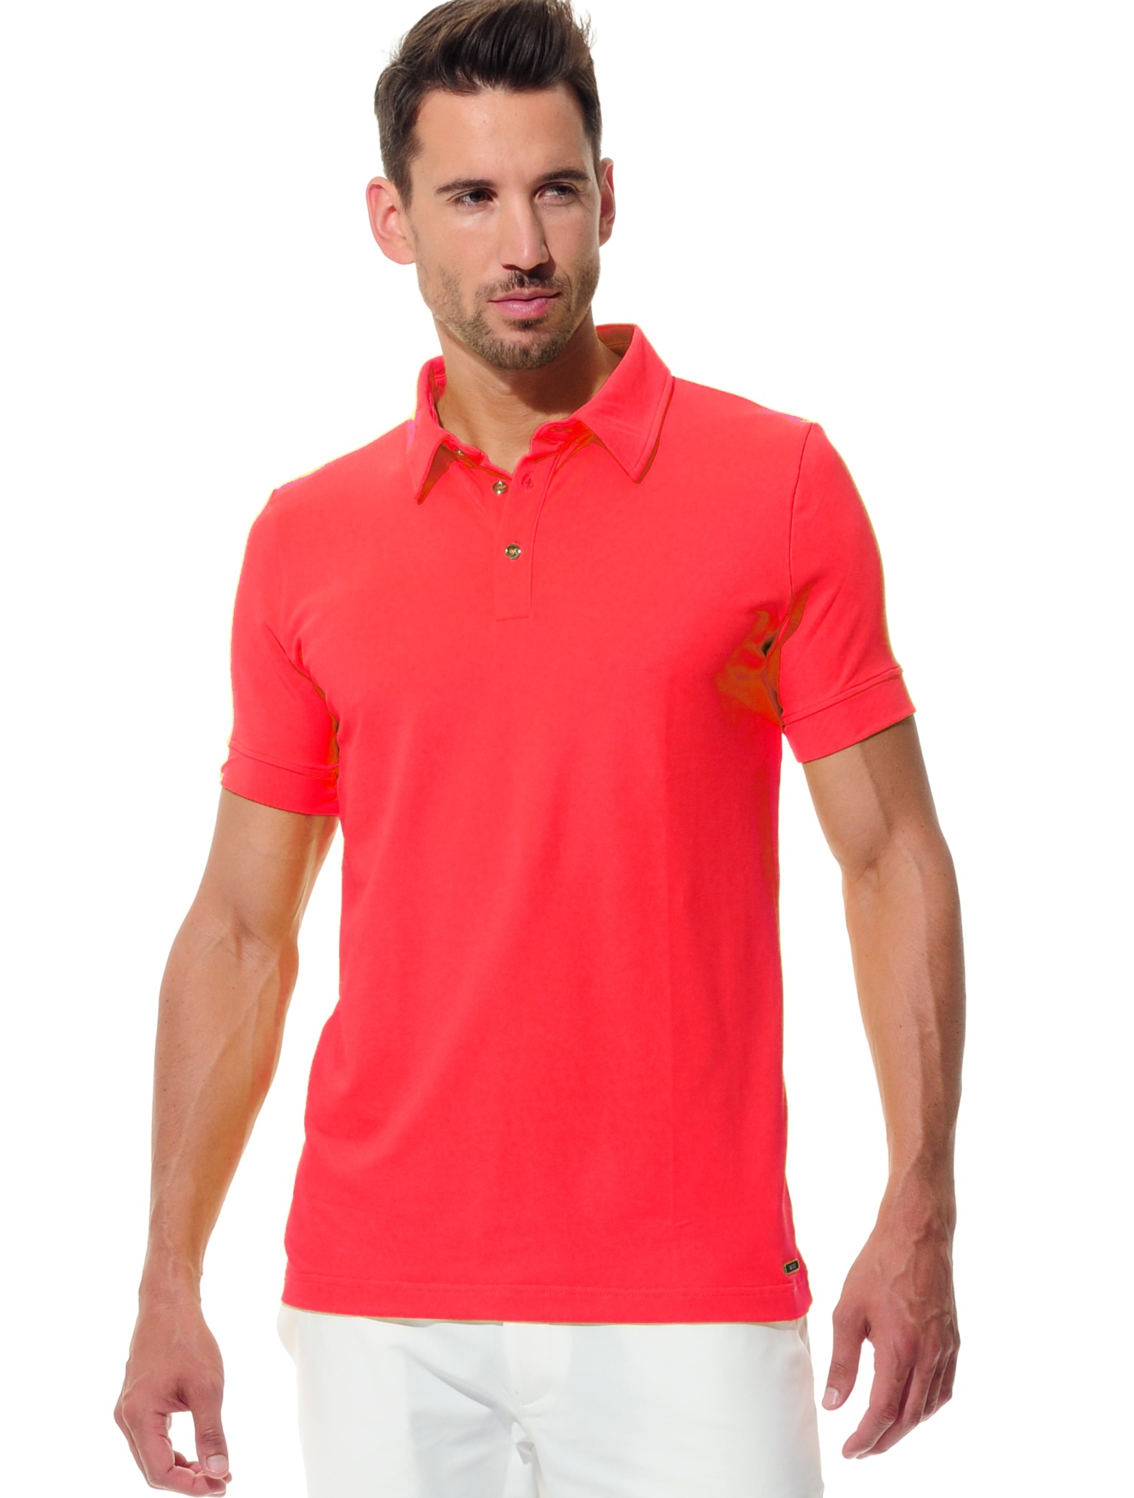 Jersey polo shirt red 